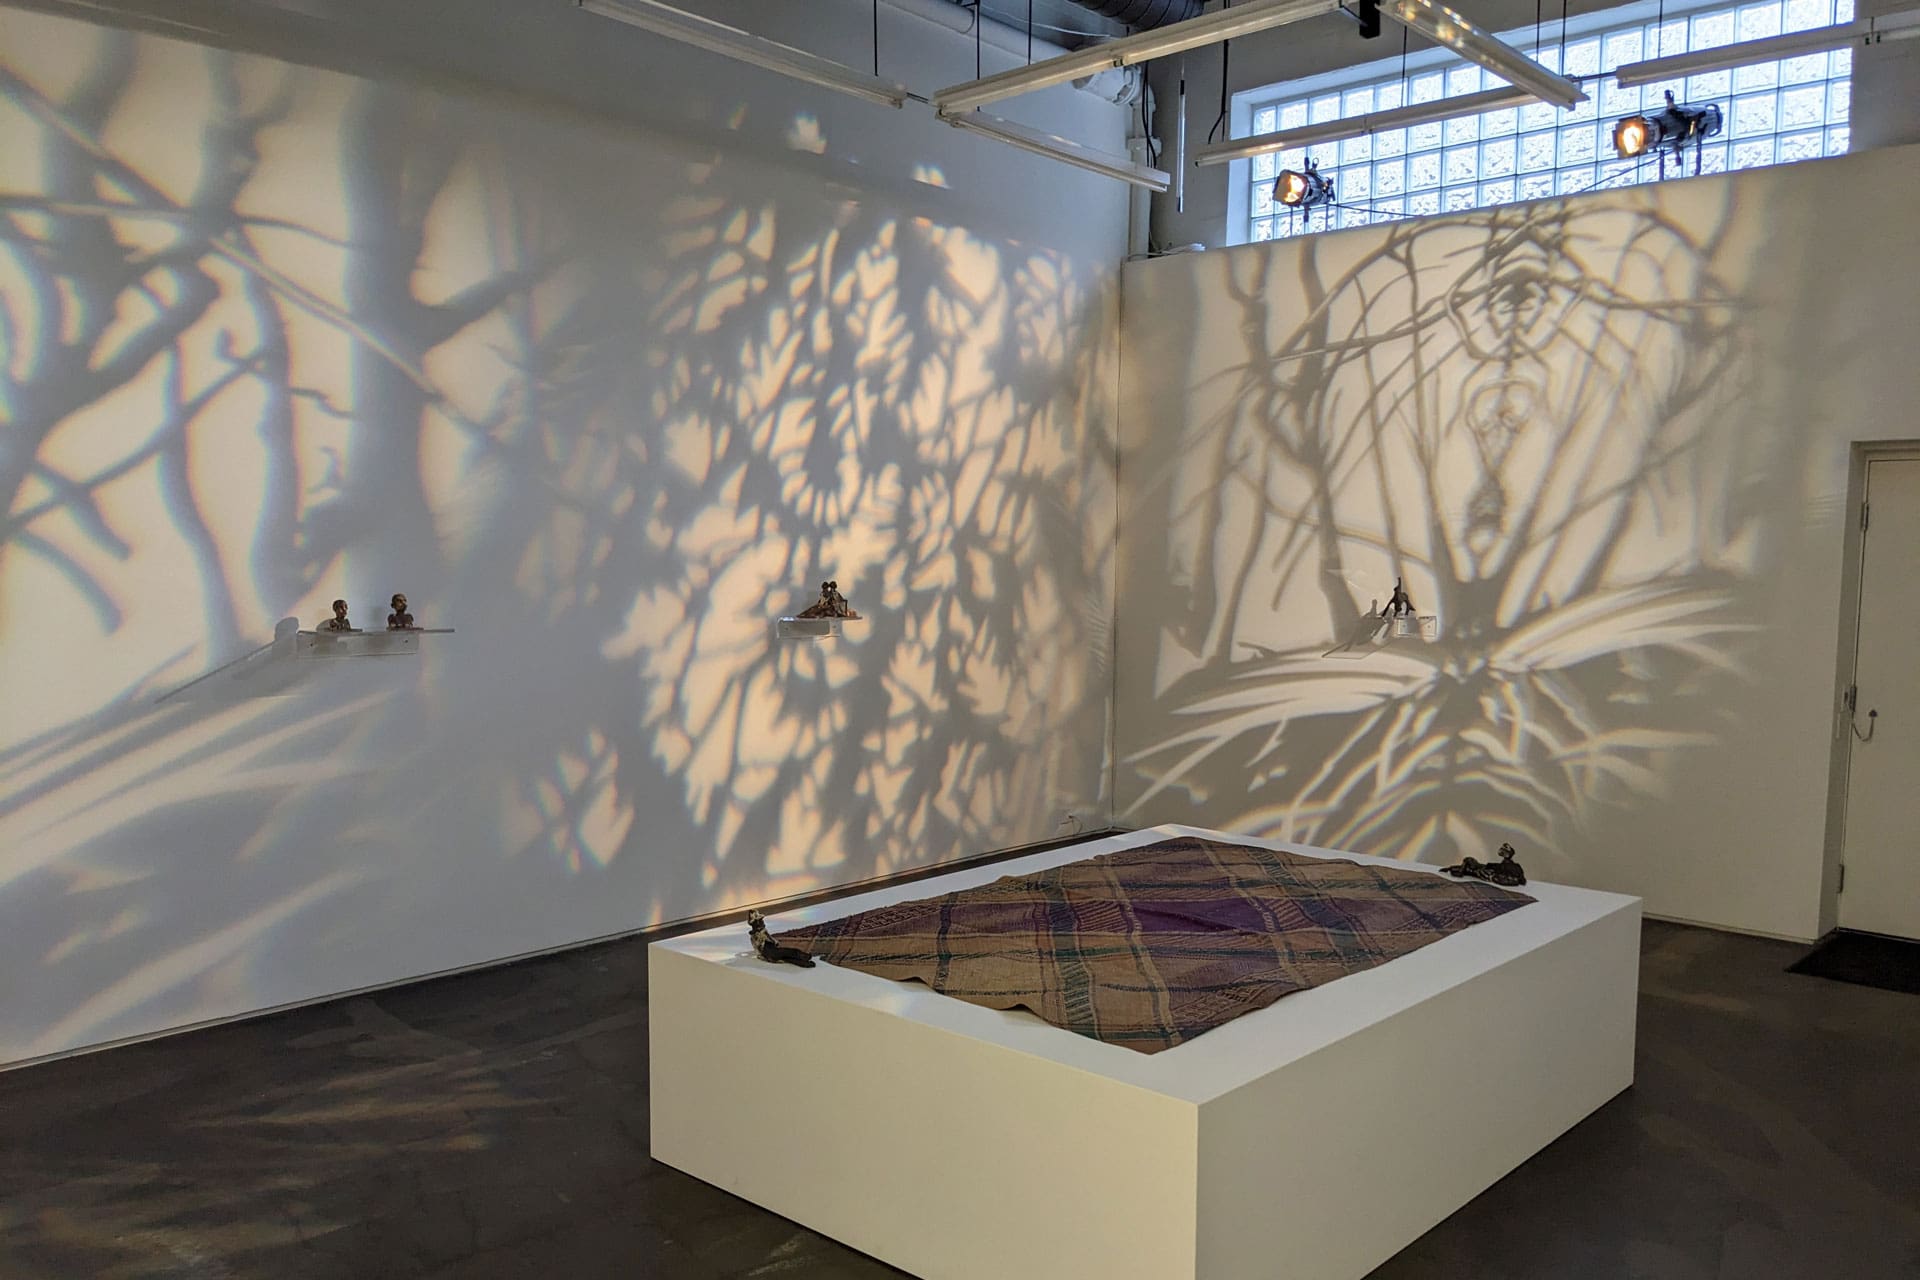 One room of a gallery featuring shadow art and a woven mat in the center.